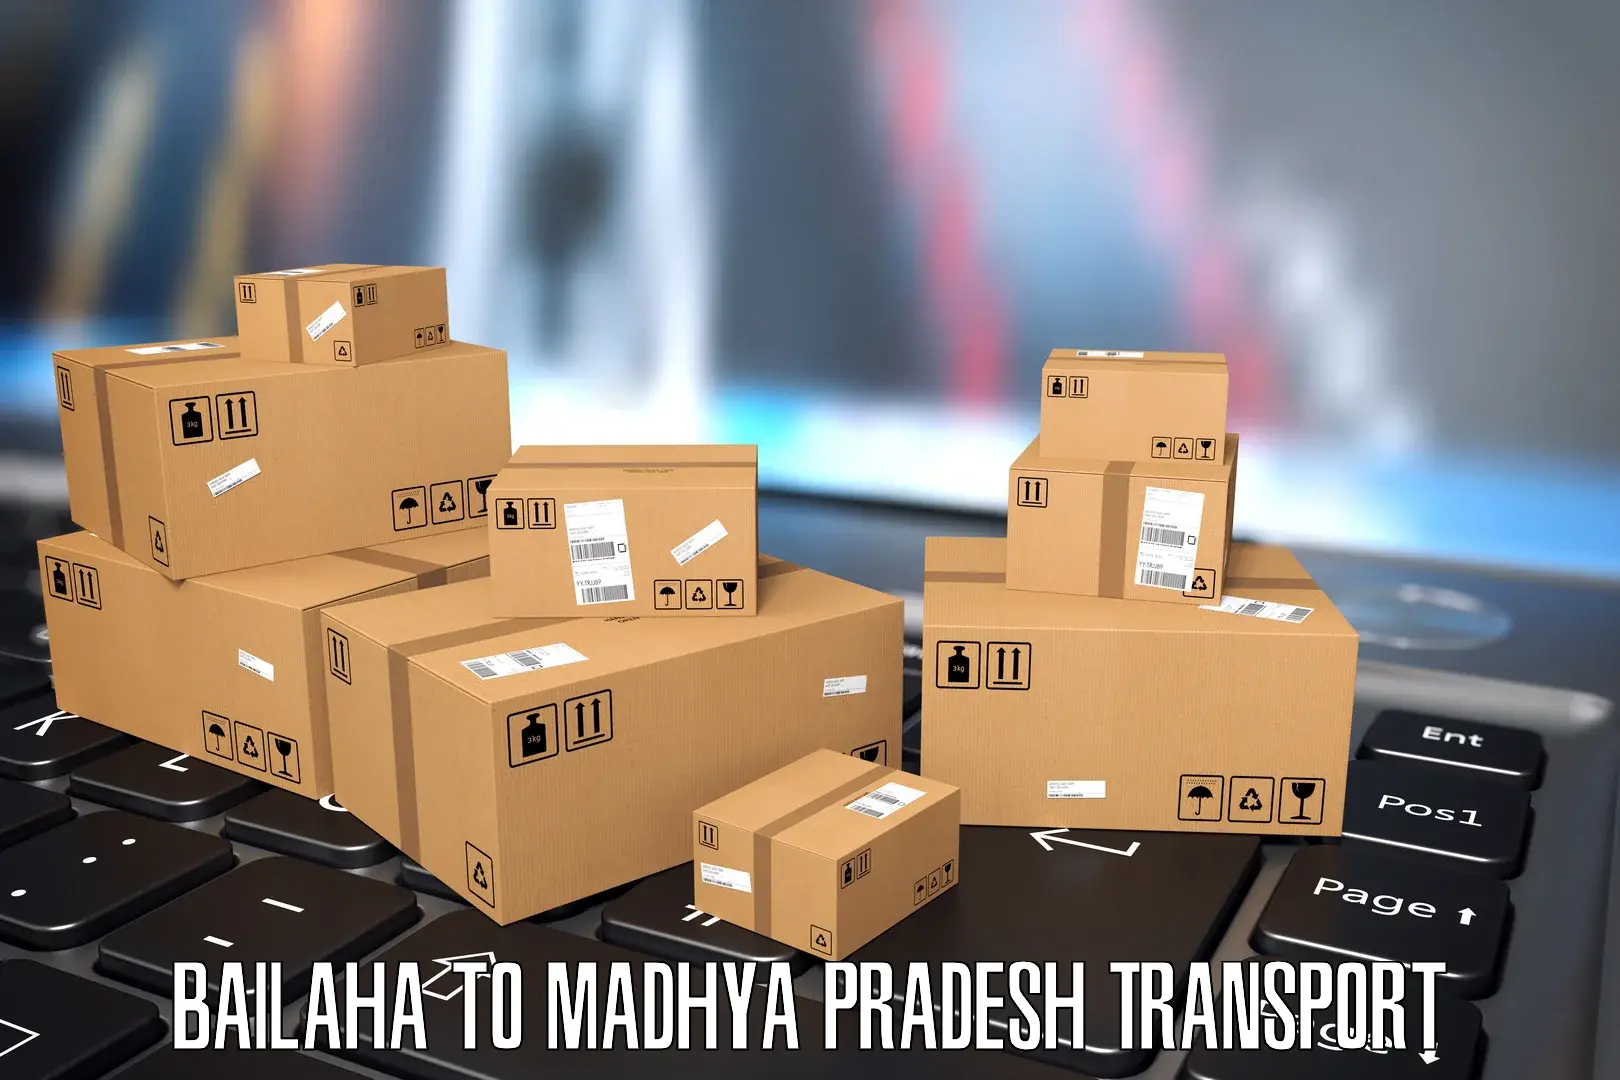 Express transport services in Bailaha to Gotegaon